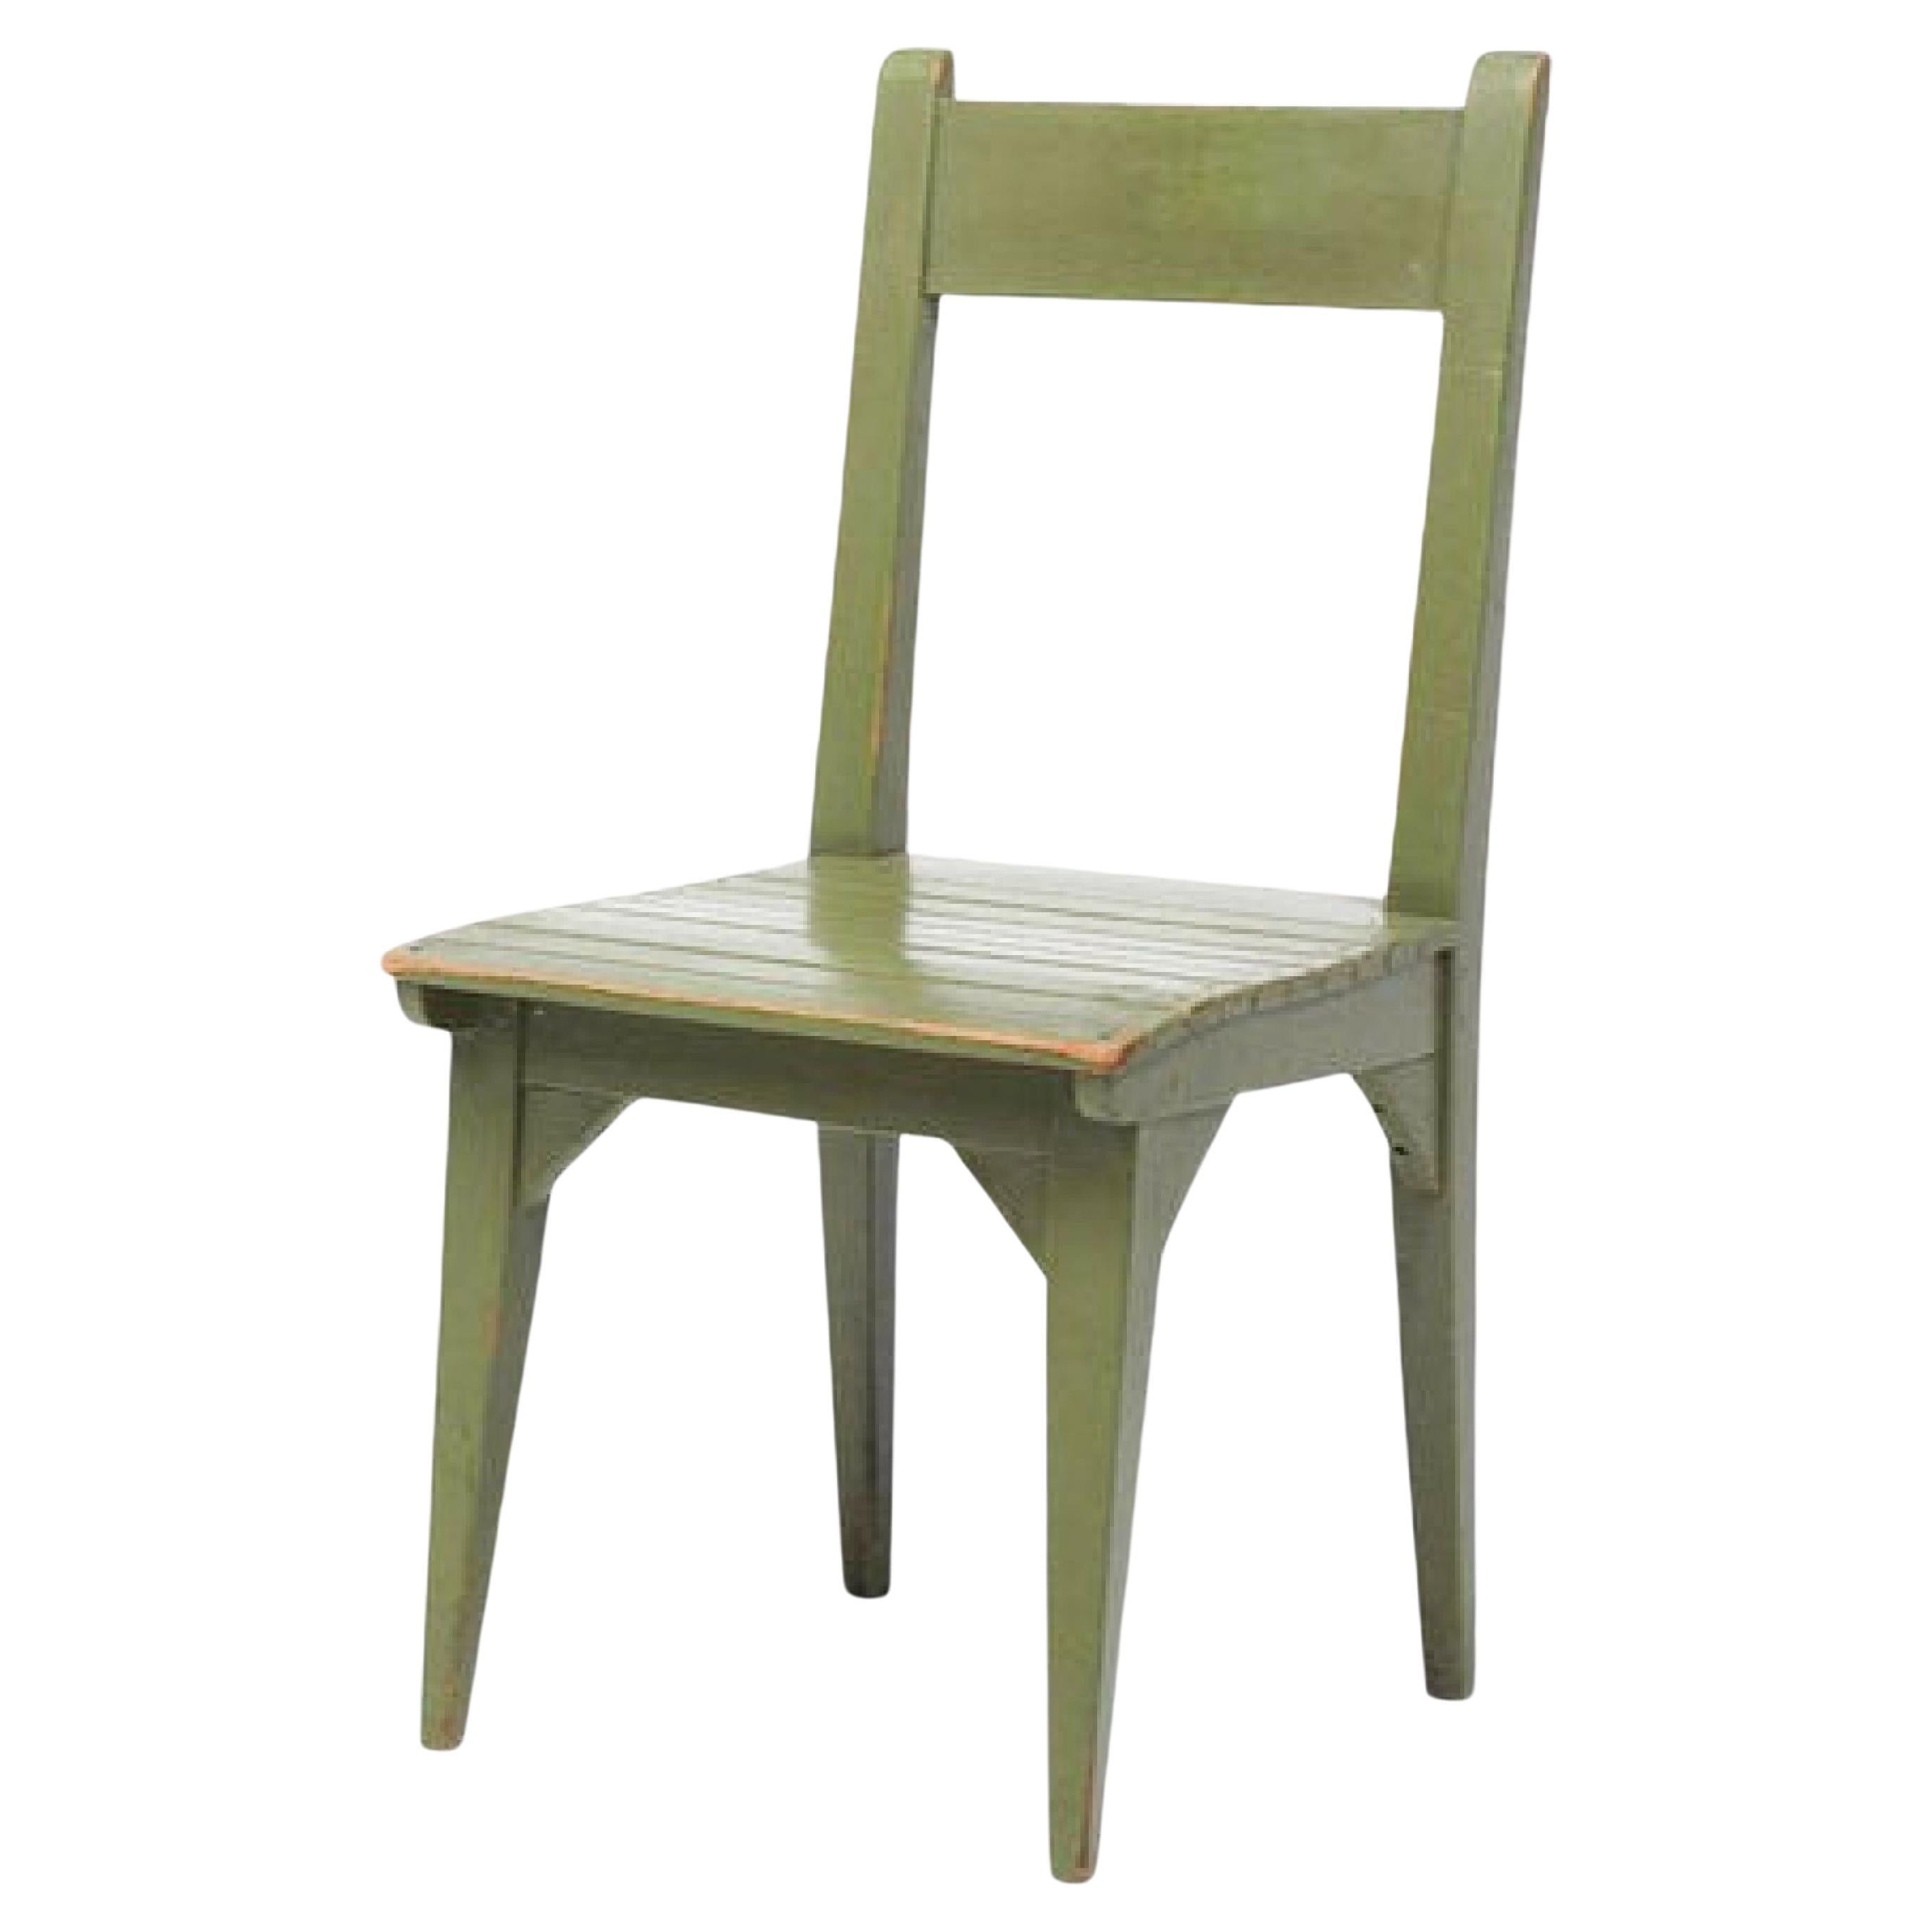 Roy McMakin Painted Wood Postmodern Dining Chair, Green, 1982, USA. For Sale